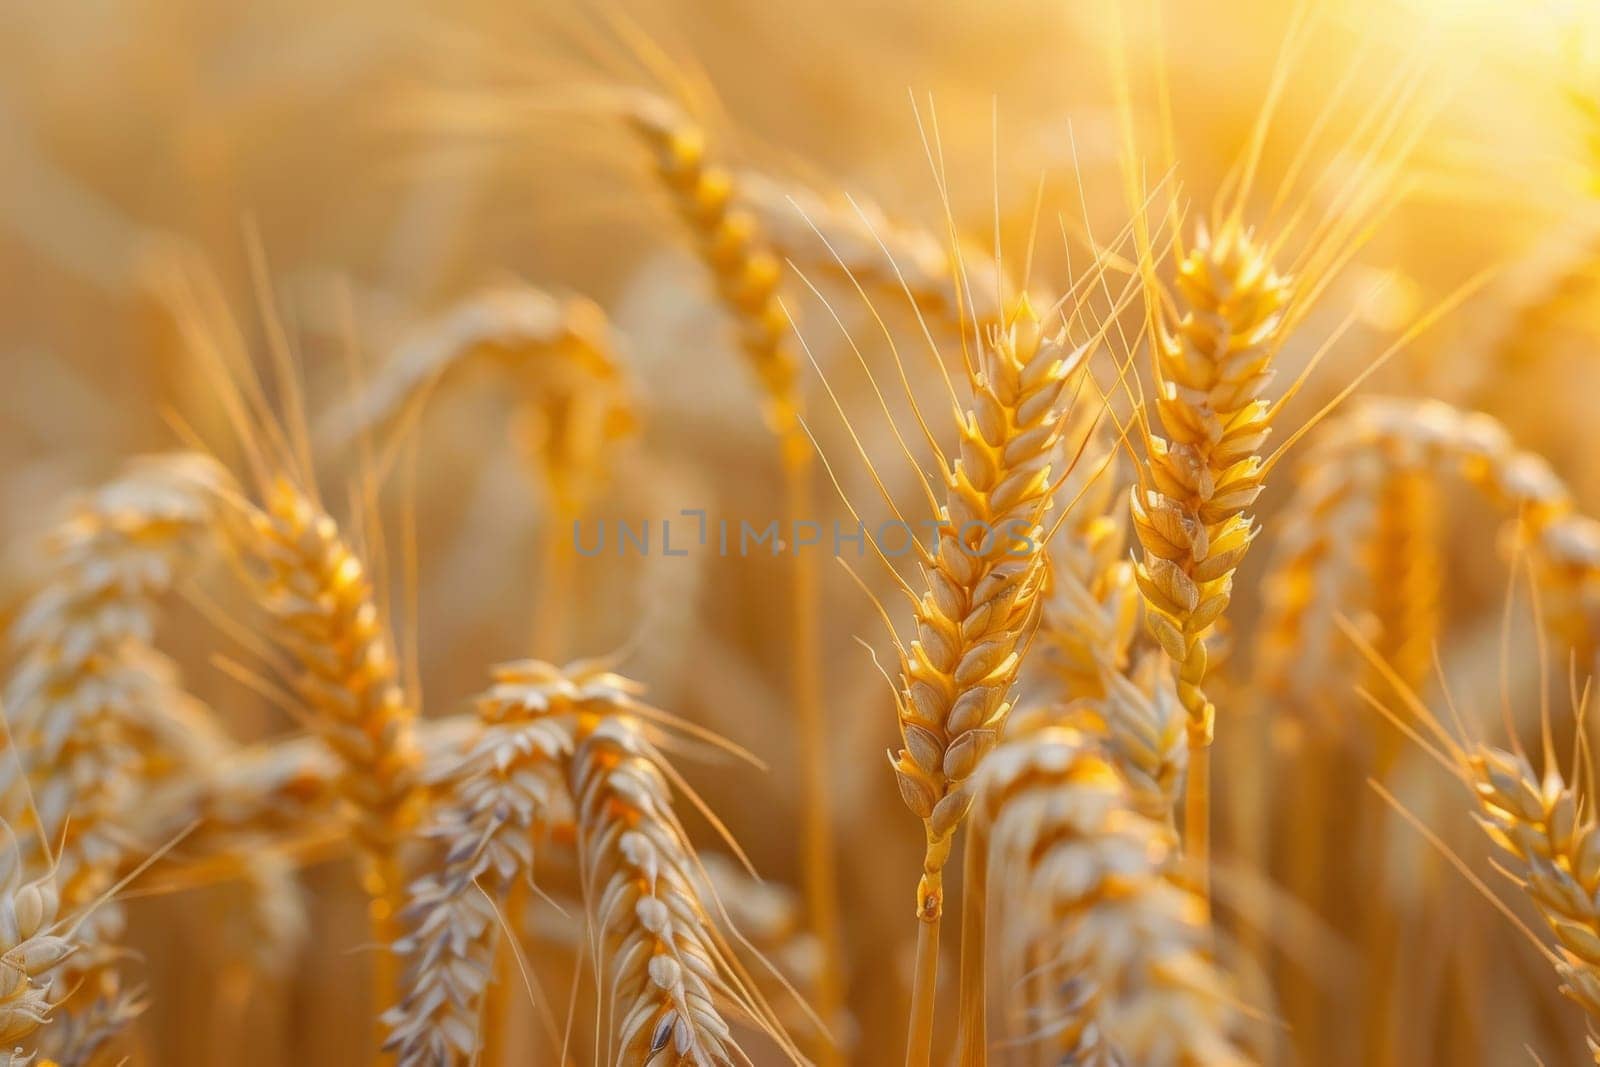 A field of golden wheat with the sun shining on it. The wheat is tall and golden, and the sun is shining brightly on it, creating a warm and inviting atmosphere